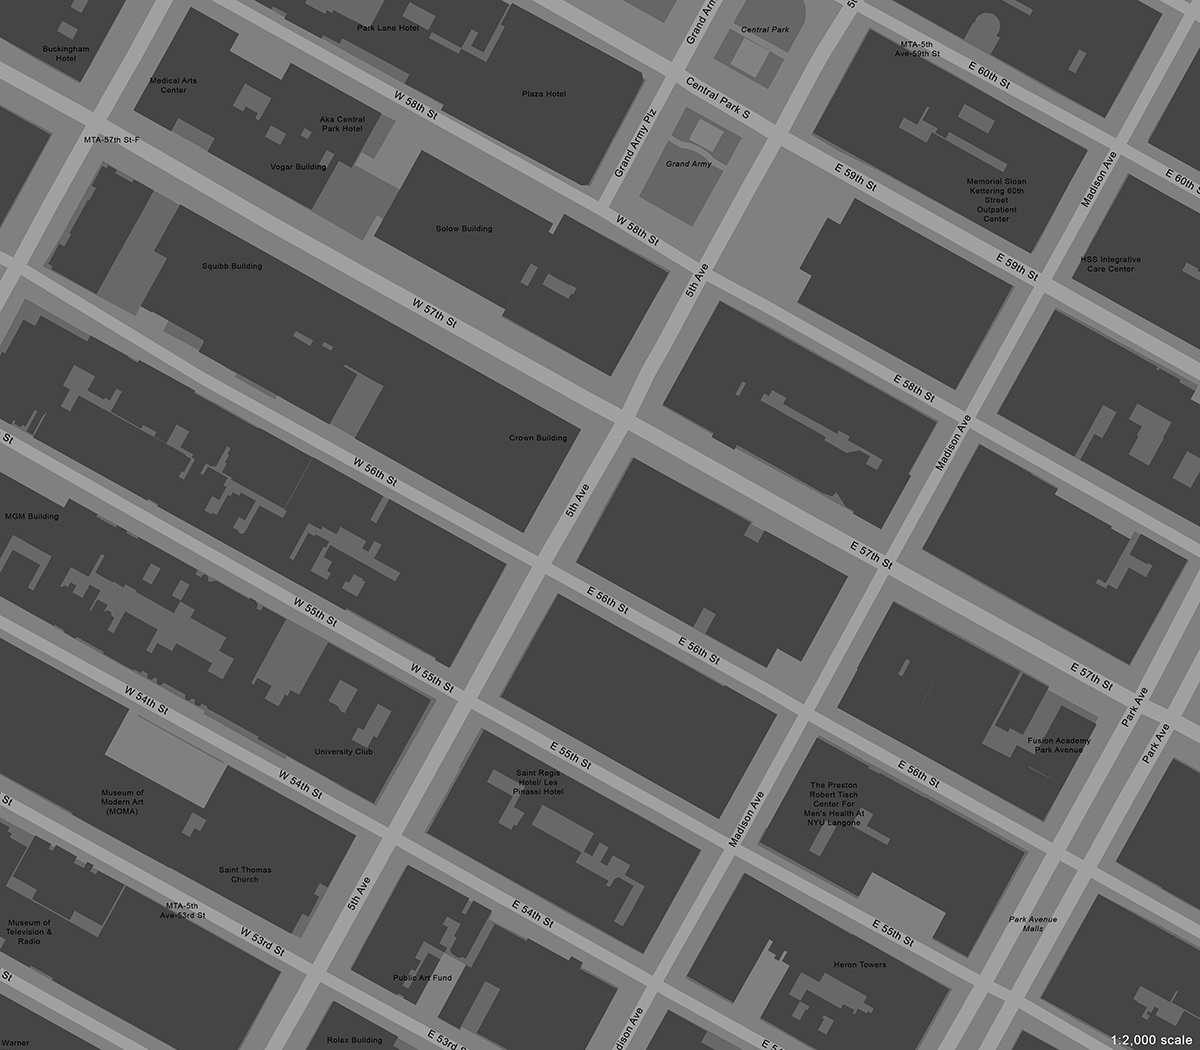 Aerial Map of a section of city blocks in Midtown Manhattan, centered around the intersections of 5th Avenue and 53rd Street through 60th Street.